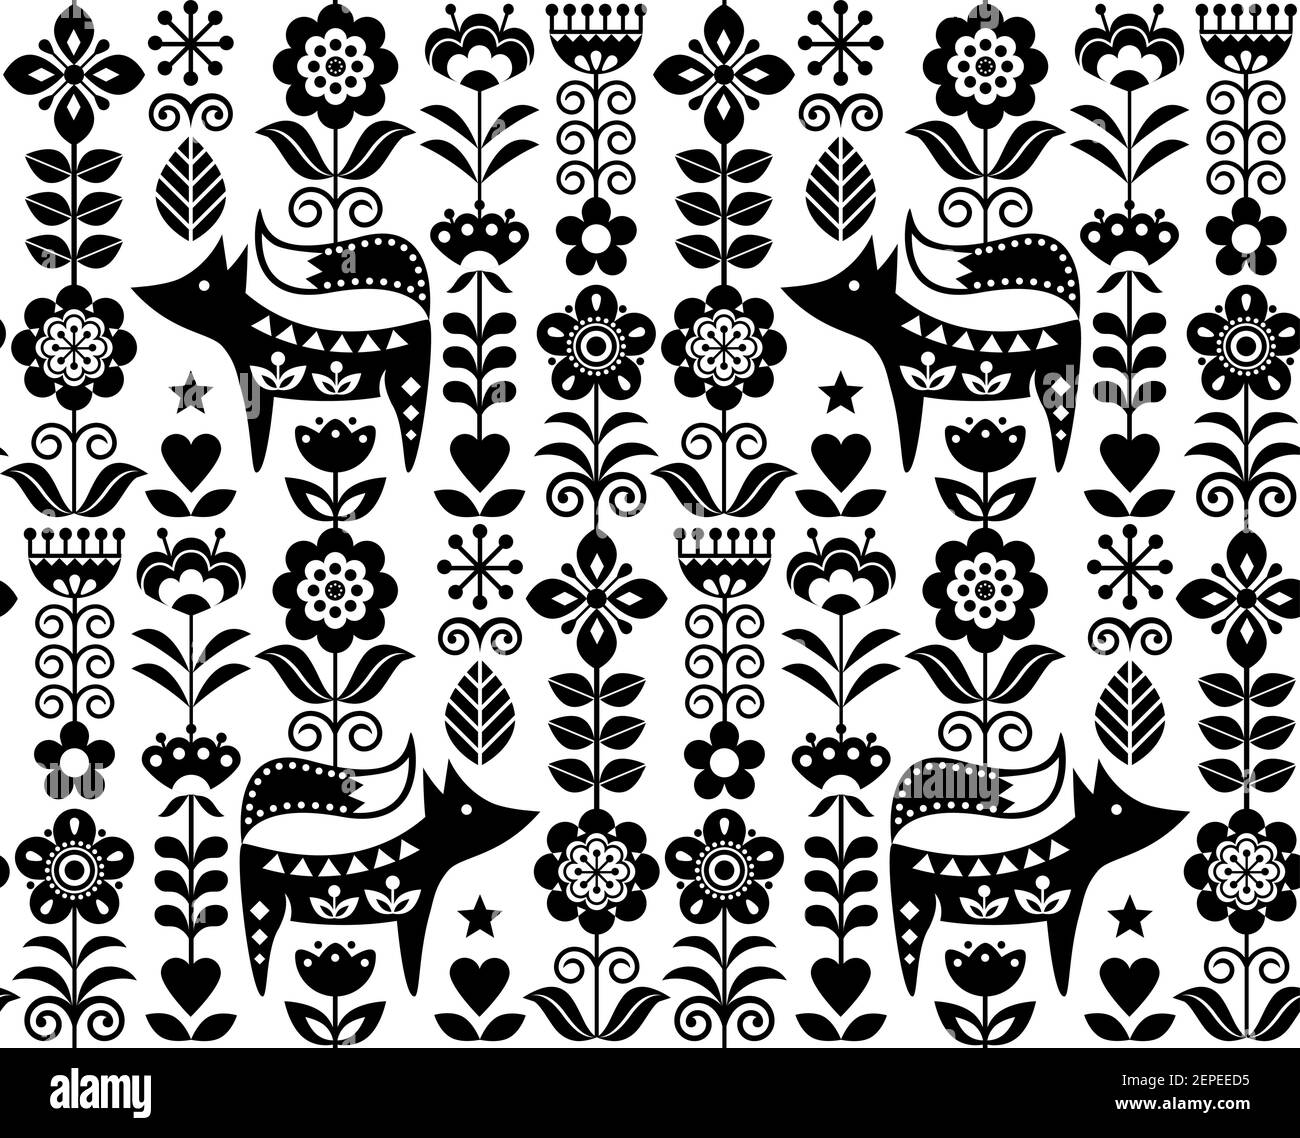 Scandinavian or Nordic folk art vector seamless pattern with flowers and fox, floral textile design inspired by traditional embroidery from Sweden, No Stock Vector